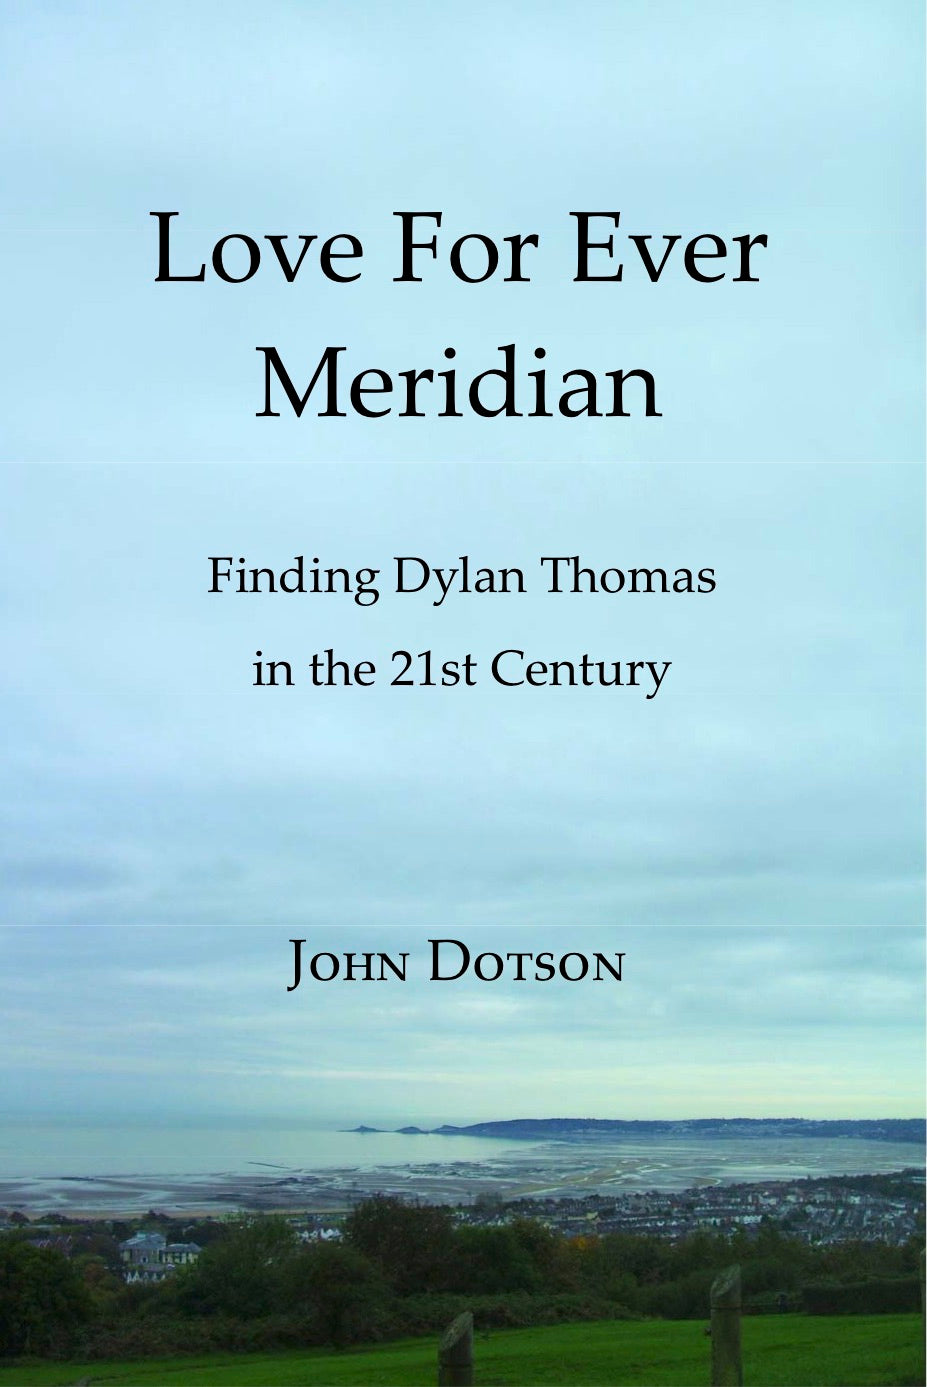 LOVE FOR EVER MERIDIAN/FINDING DYLAN THOMAS IN THE 21ST CENTURY by American writer John Dotson, 2012